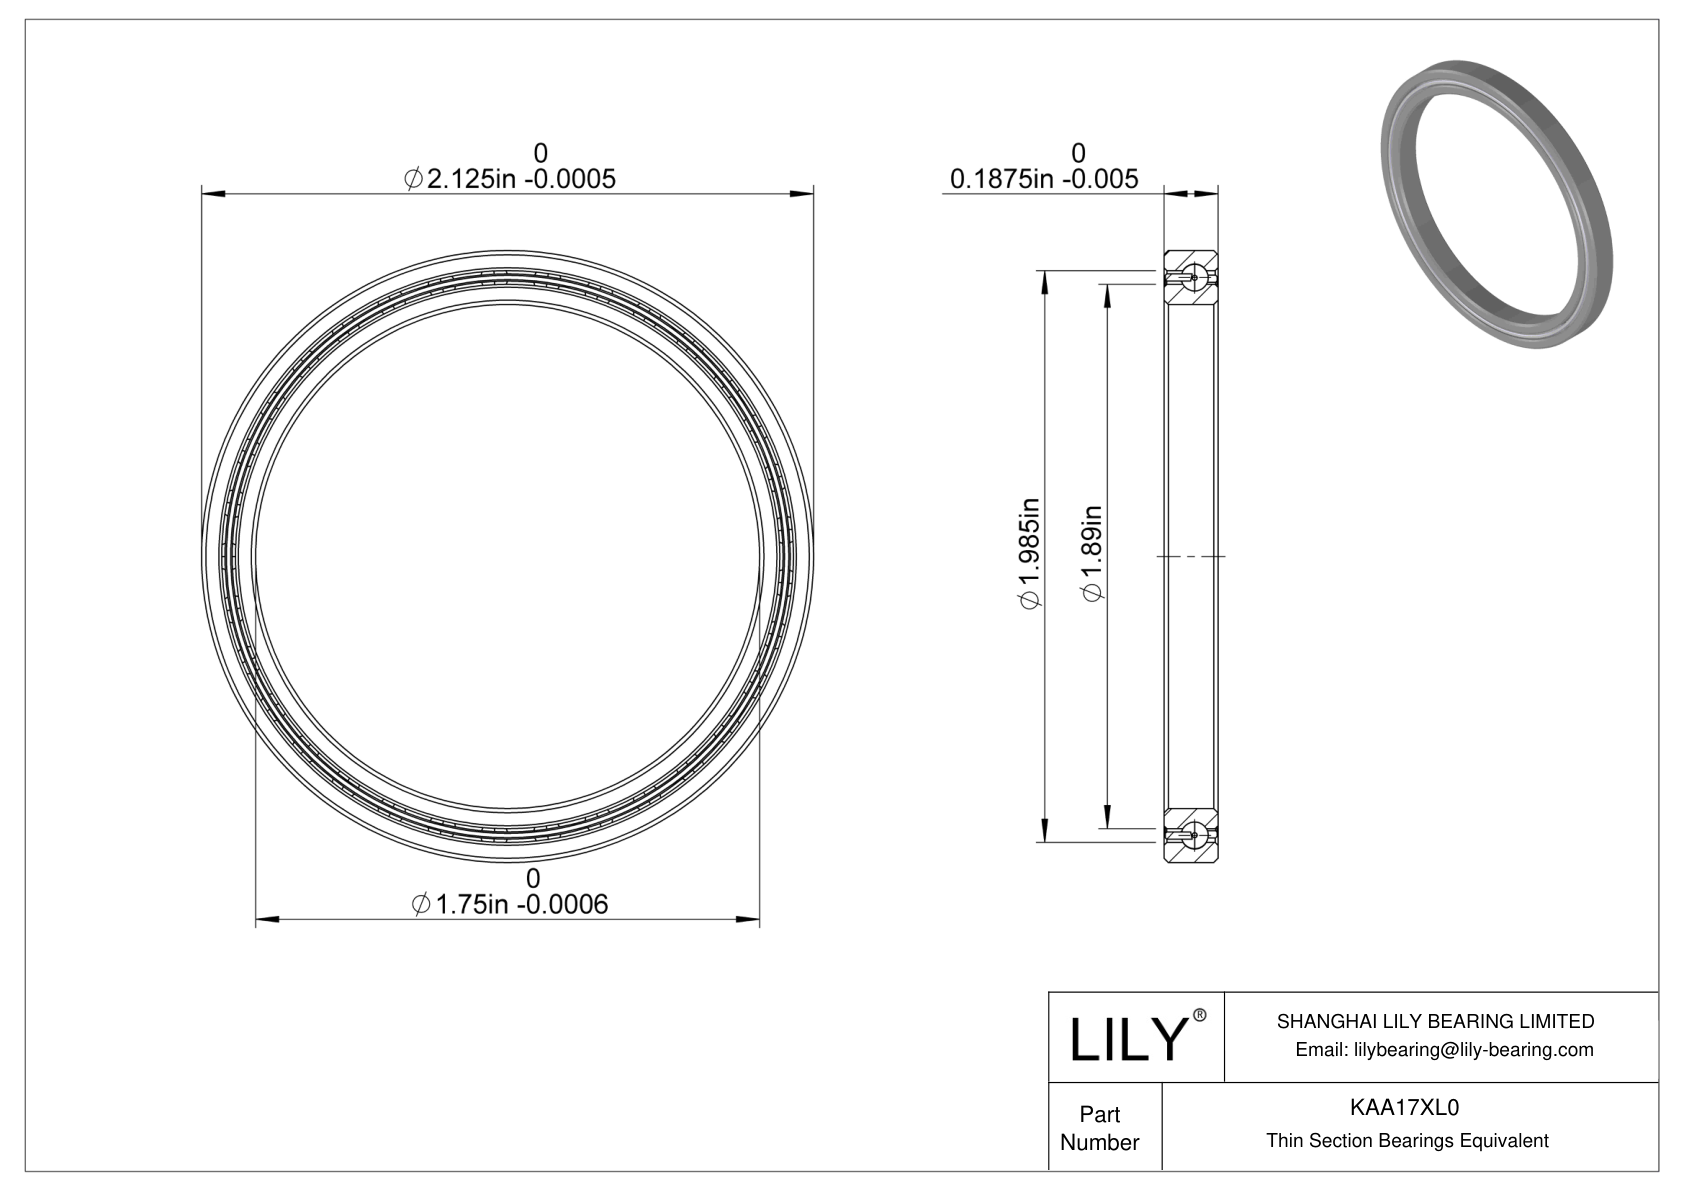 KAA17XL0 Constant Section (CS) Bearings cad drawing